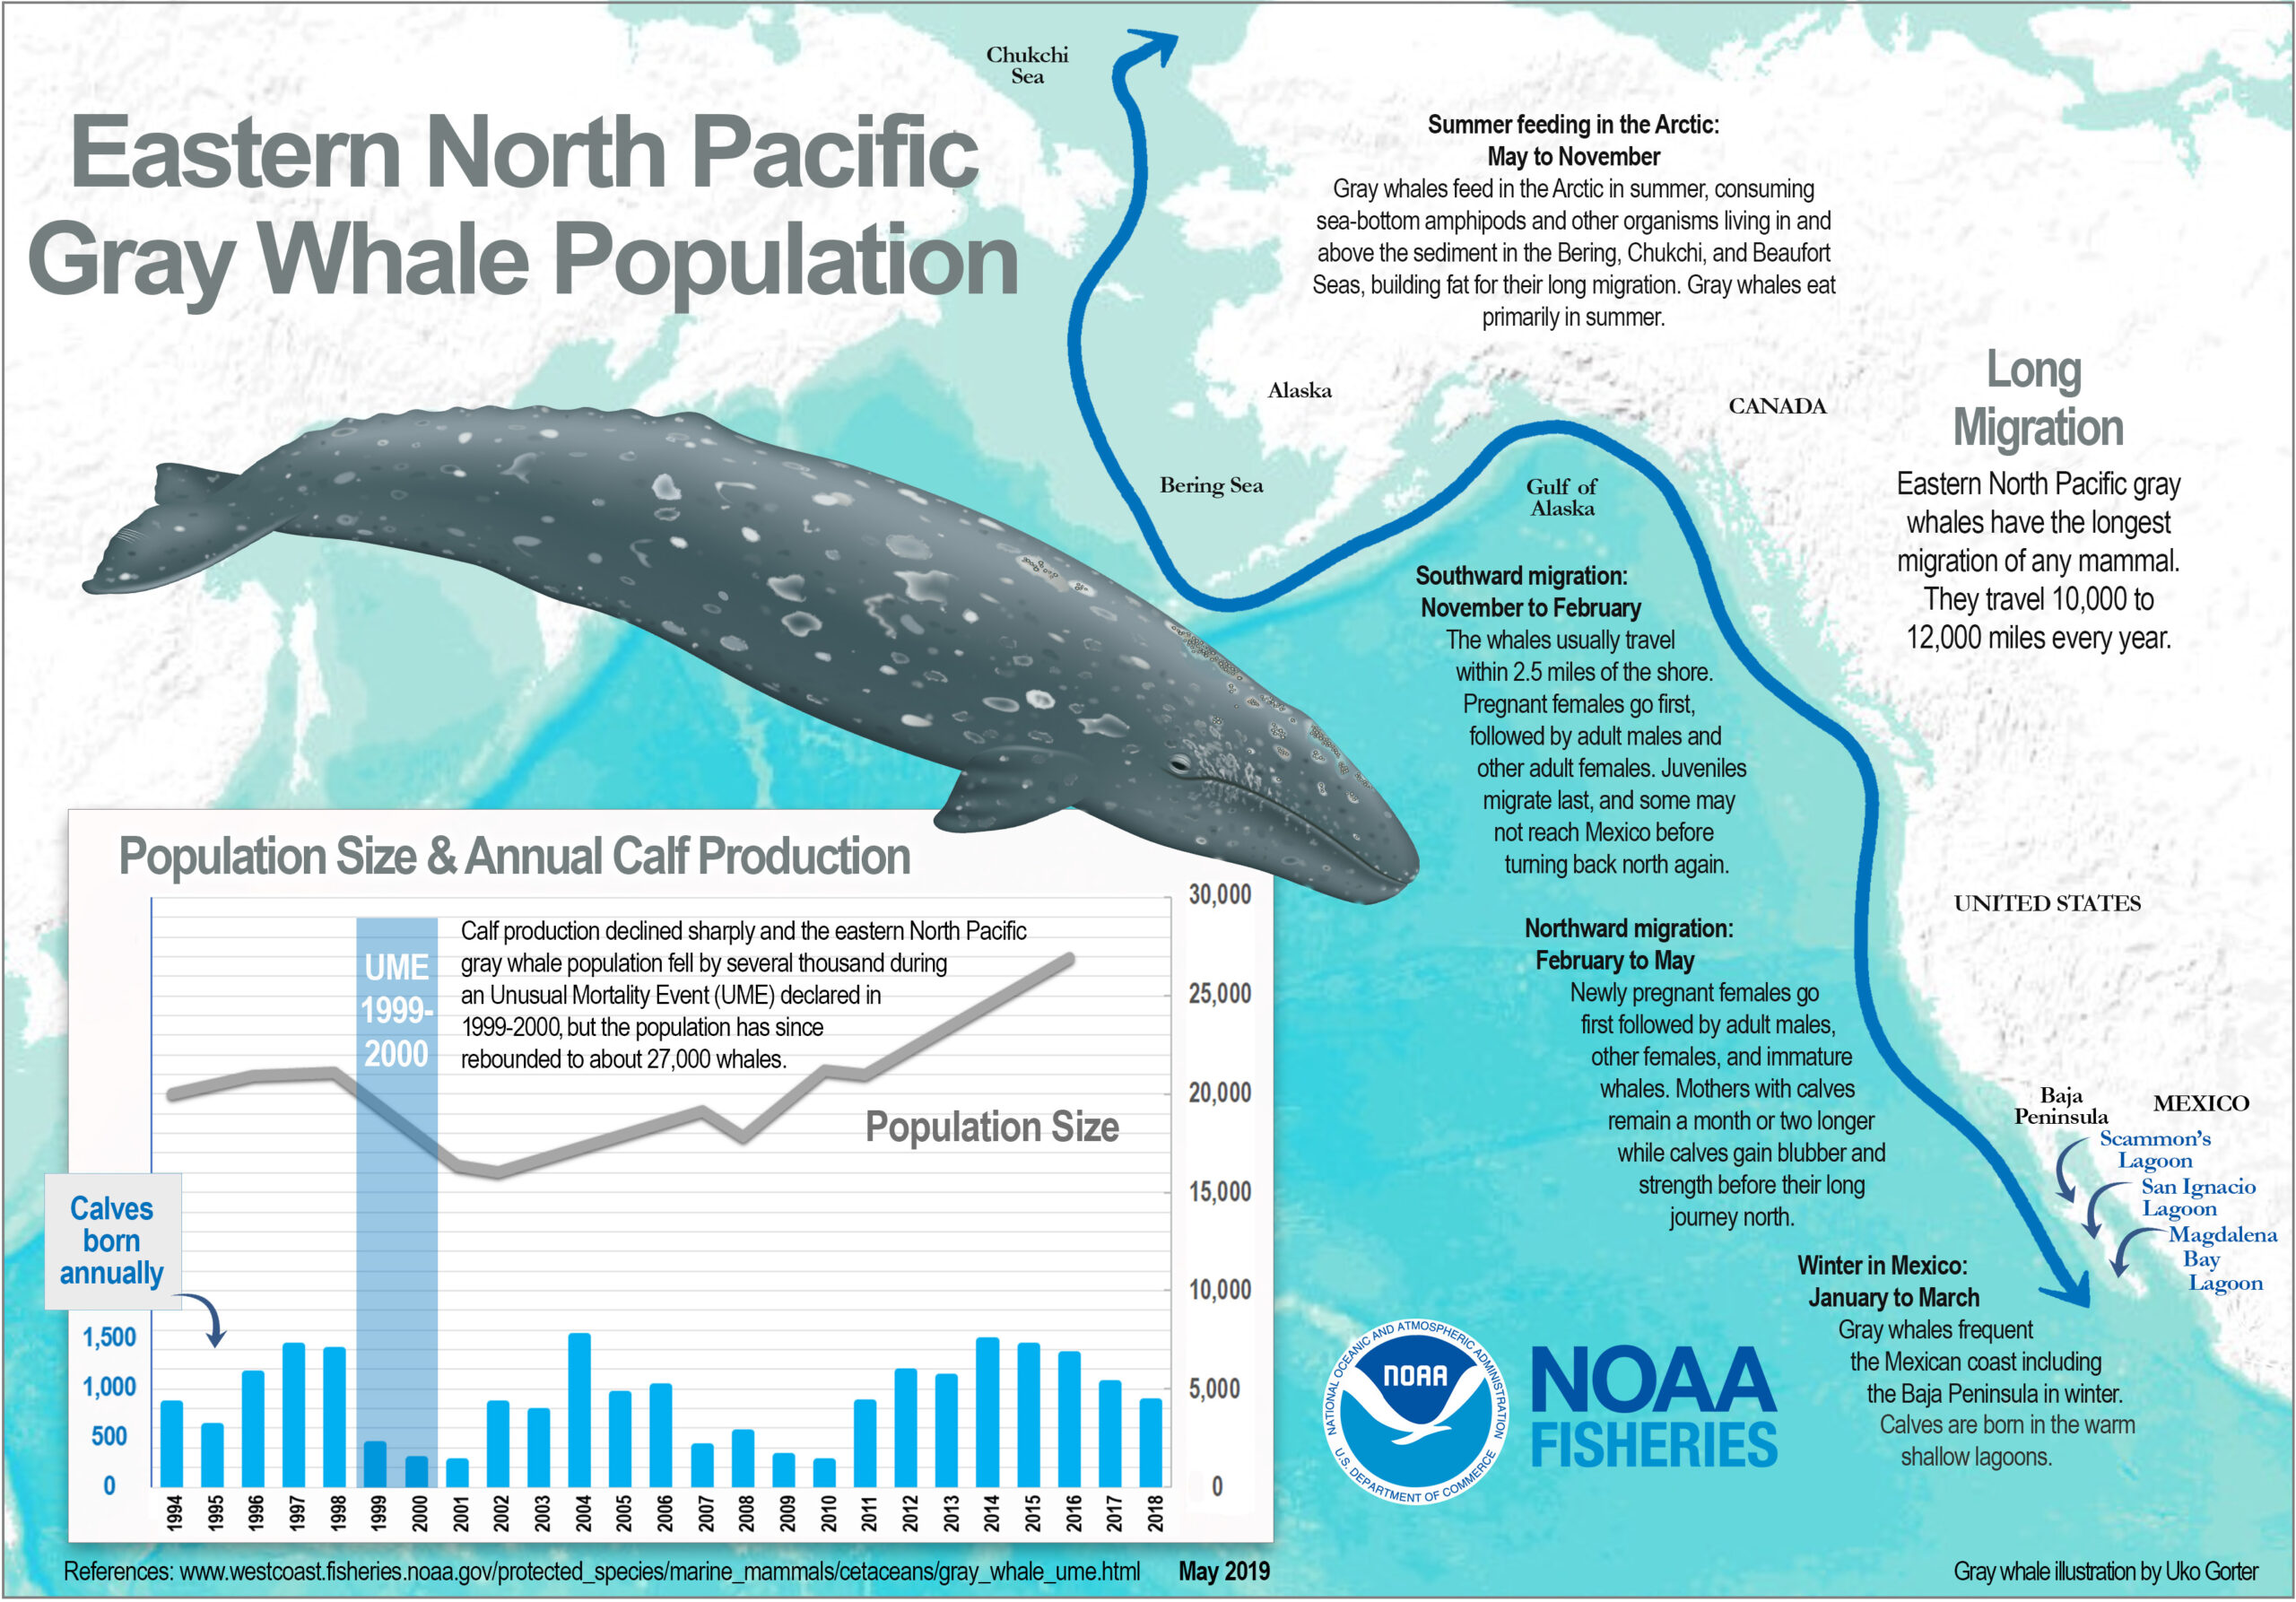 A map of the North Pacific Ocean titled "Eastern North Pacific Gray Whale Population." A blue arrow traces the coast from Northern Alaska to the Baja Peninsula in Mexico. An inset in the bottom left corner shows a graph of the population szie and annual calf production, which declined during an Unusual Mortality Event in 1999-2000, but has since increased to about 27,00 whales. There is also an illustration of a gray whale, and othe text describing the migration of gray whales.